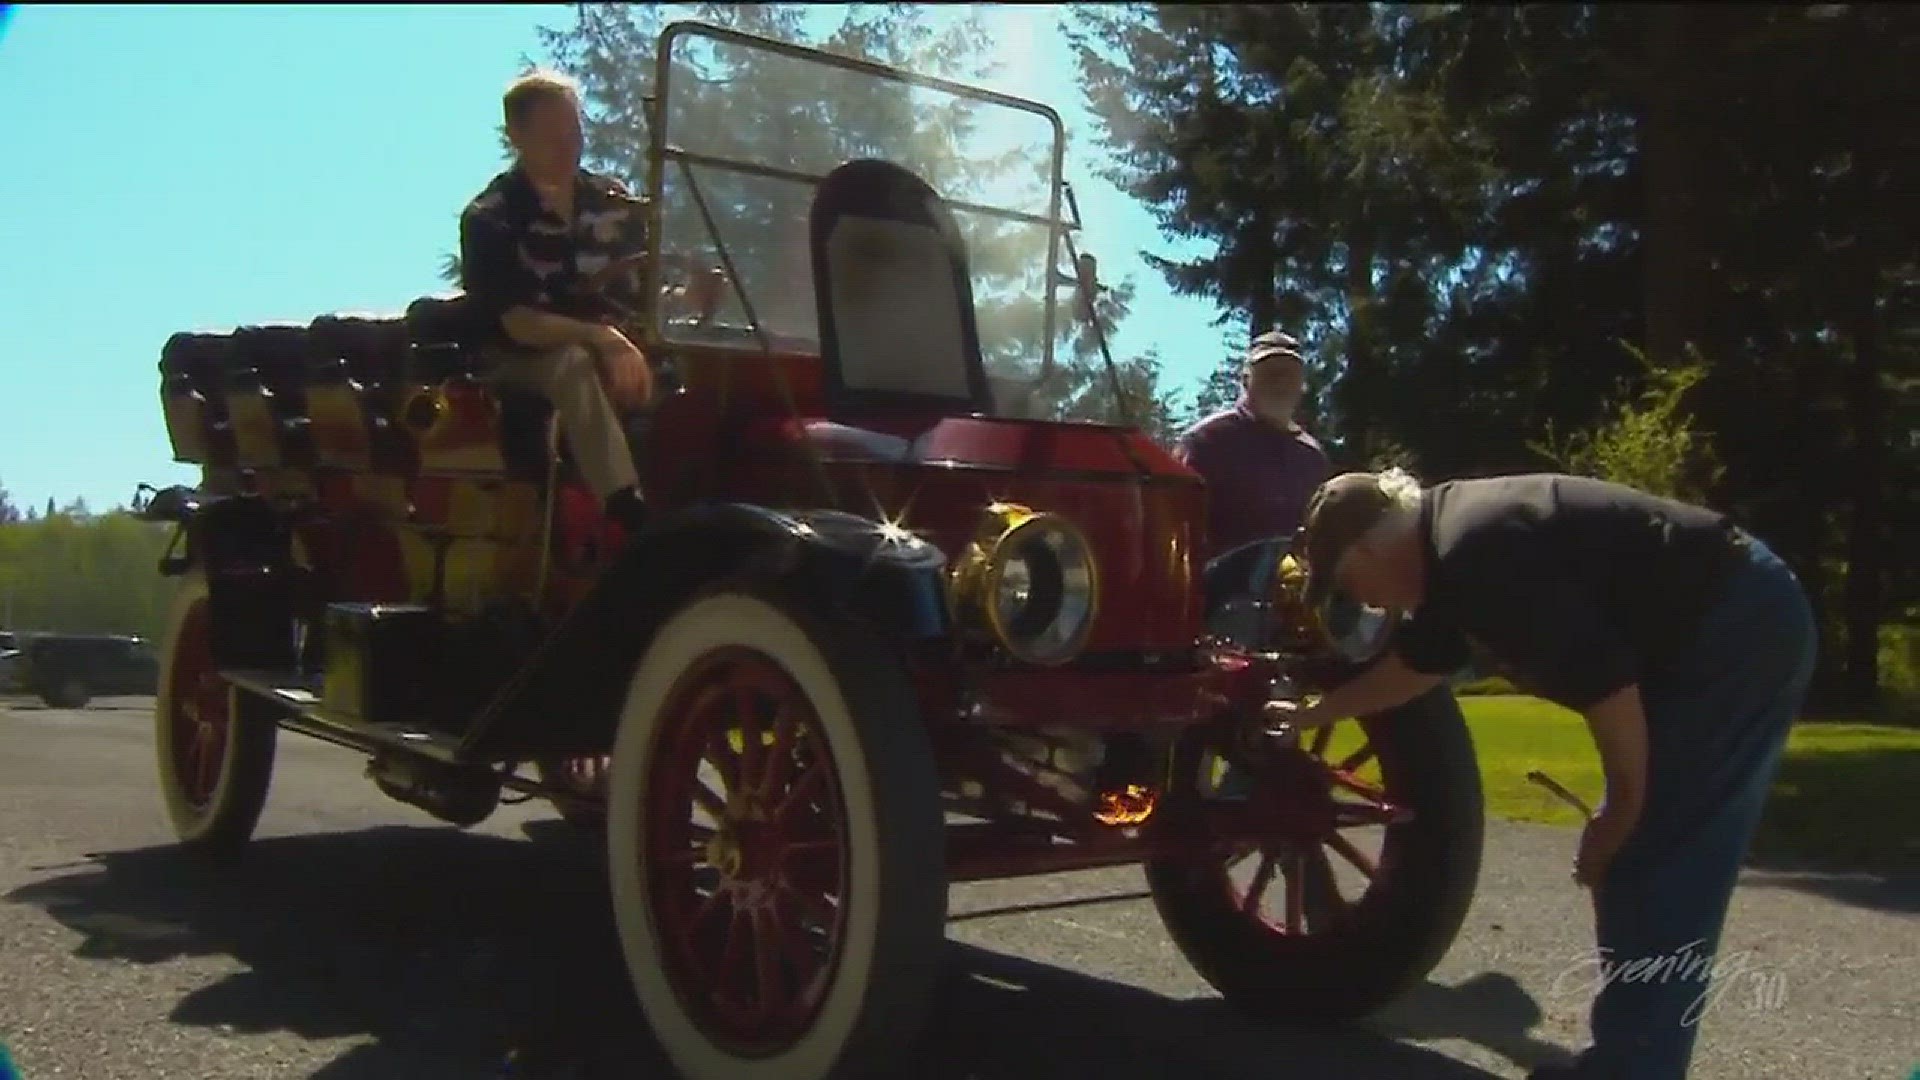 It's a time machine powered by steam.  Thanks to Orcas Island resident and resident historian Grant Schumaker, a century-old mode of transportation is on the road again.